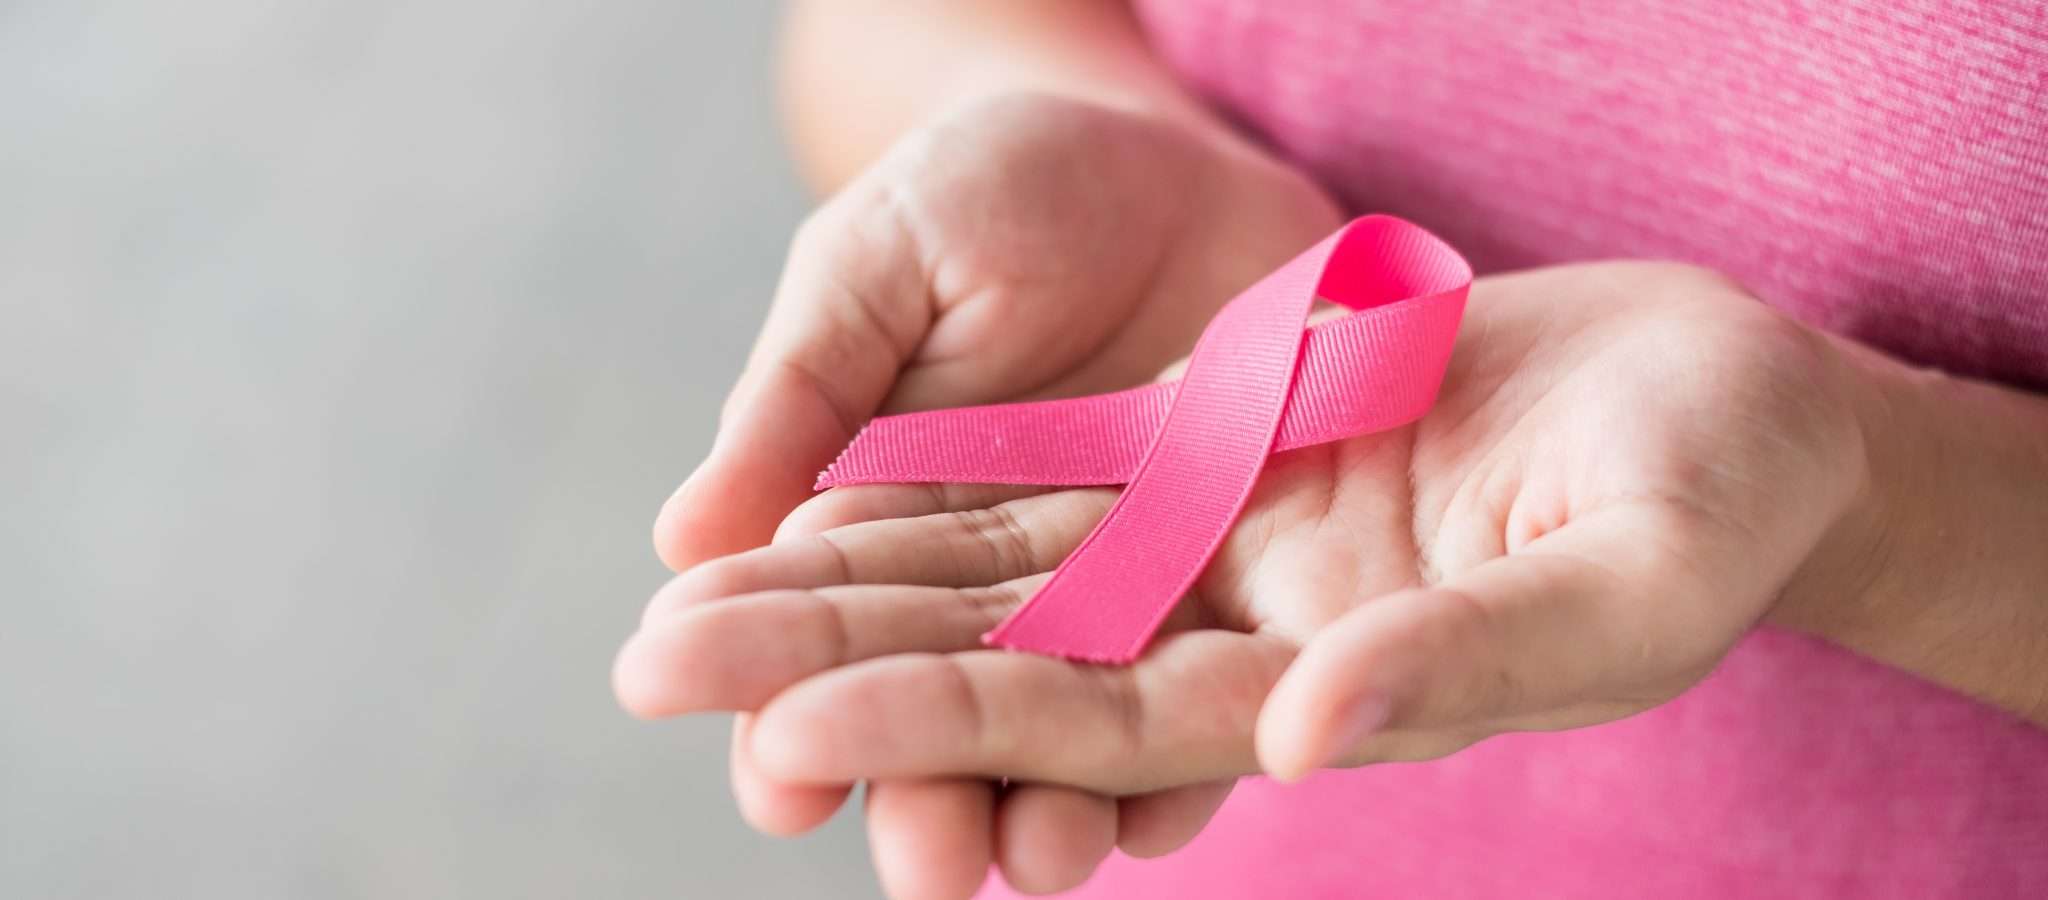 Coping After a Breast Cancer Diagnosis: 5 Tips